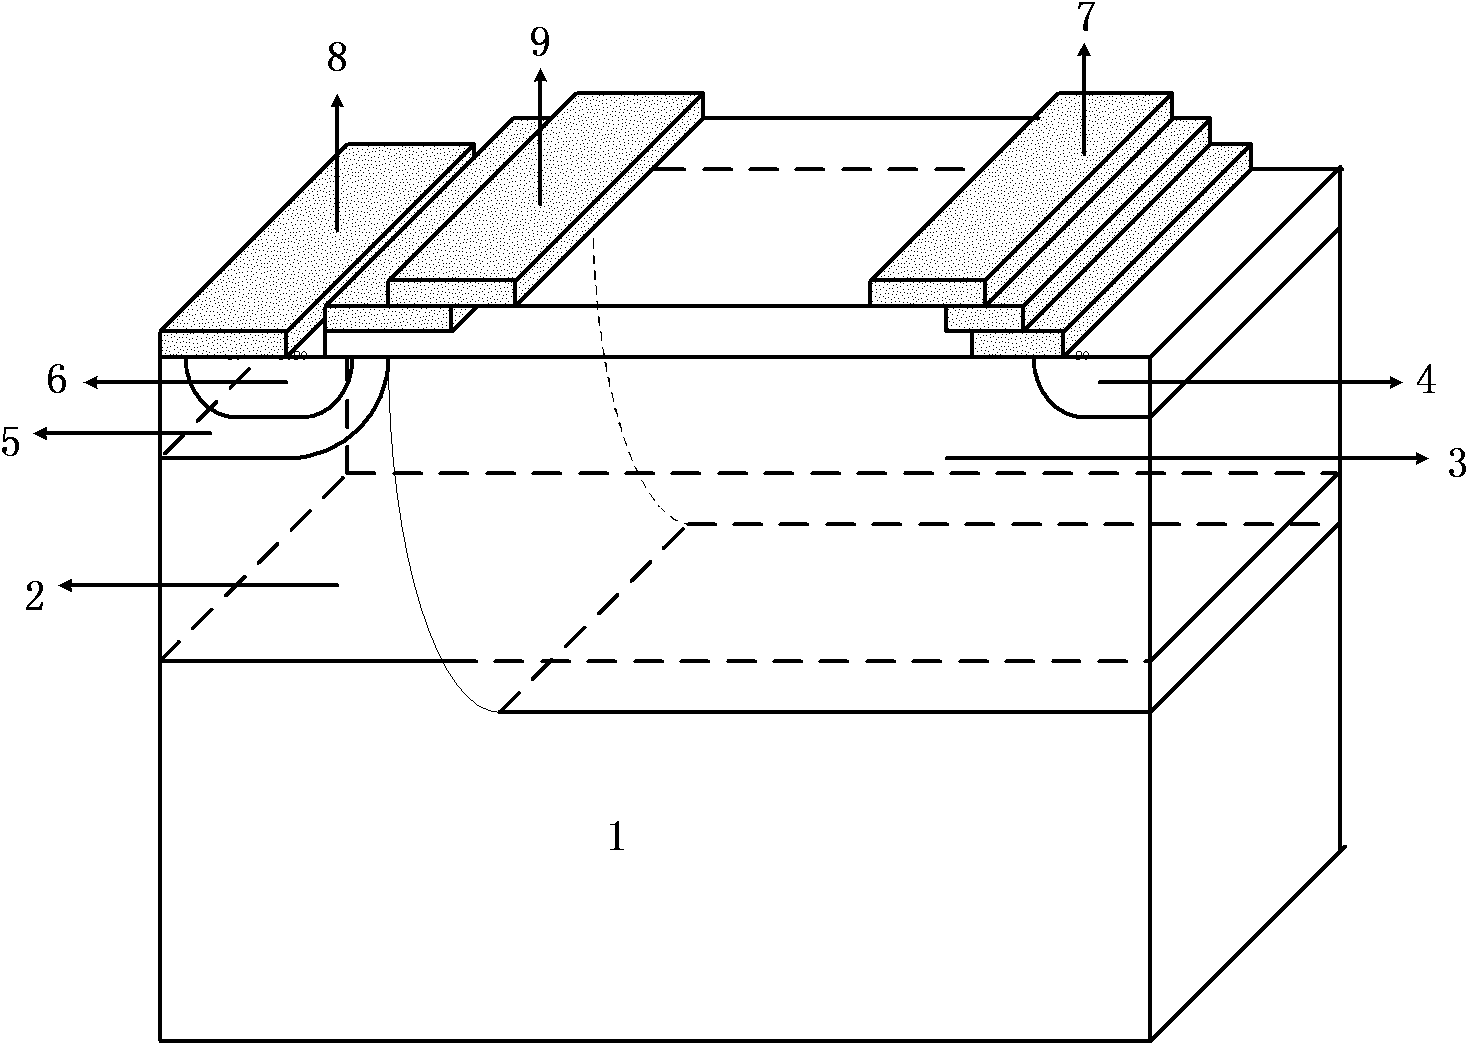 High-voltage LDMOS (landscape diffusion metal oxide semiconductor) device